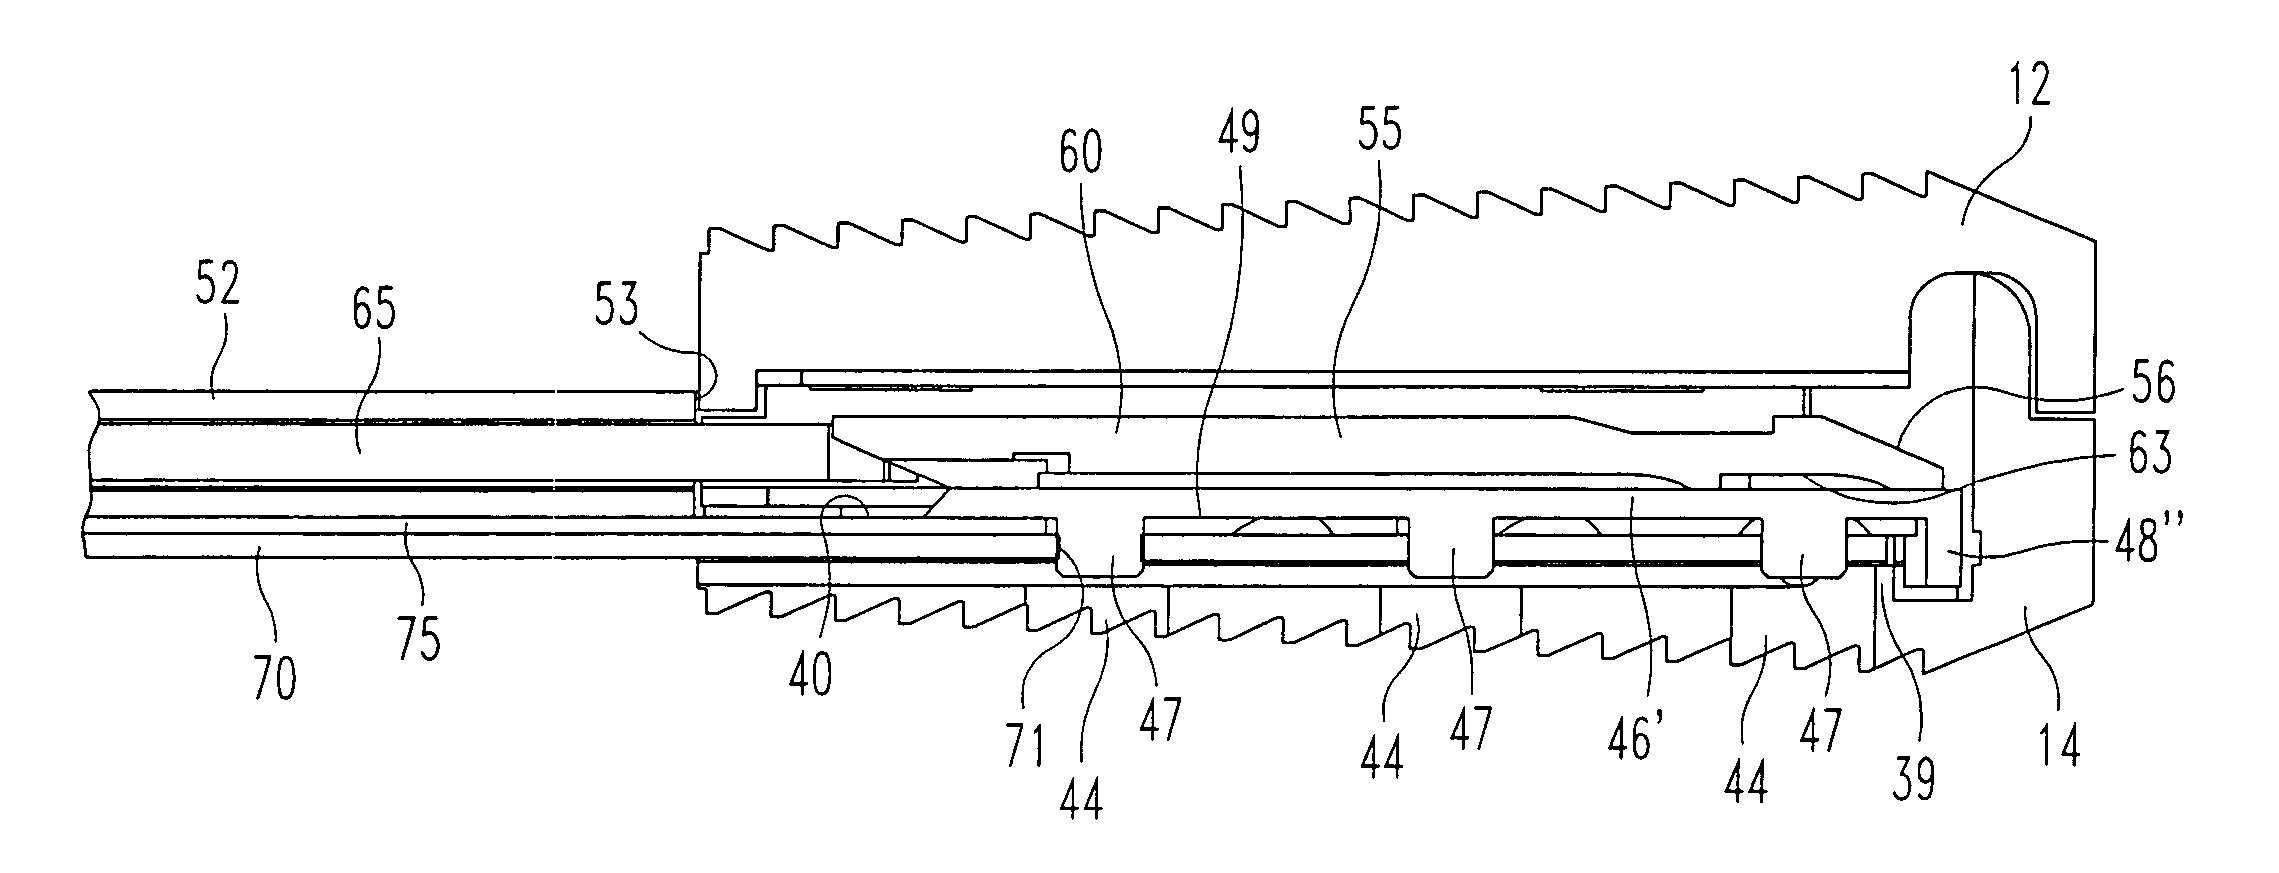 Expandable interbody fusion device